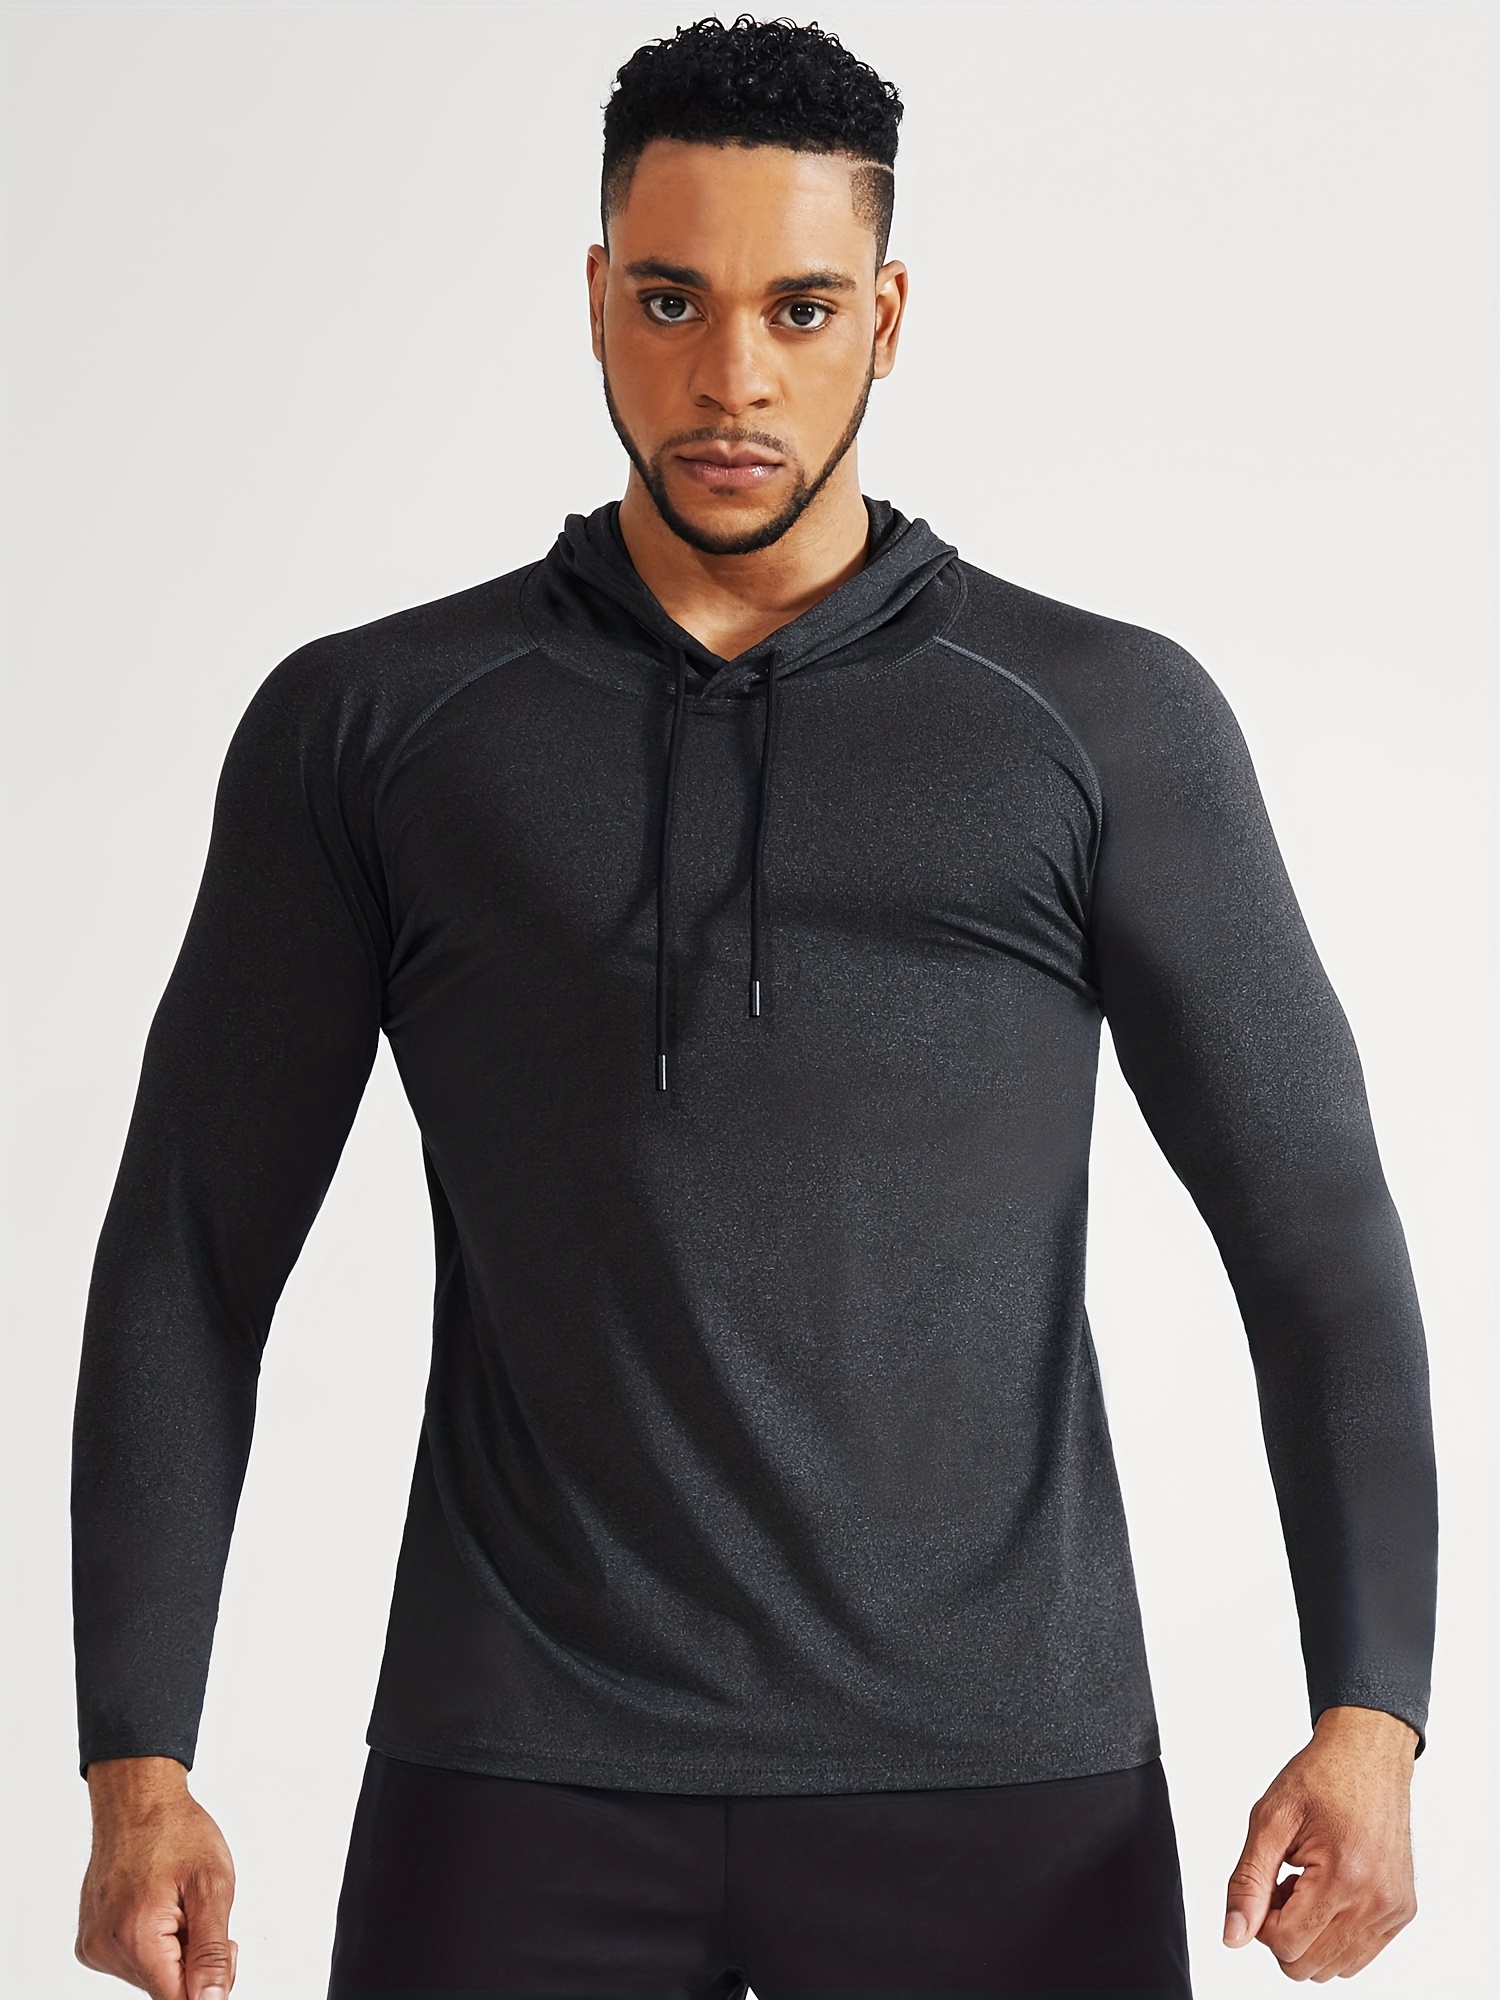 Long Sleeve Workout Hoodie Shirts for Men, Lightweight Athletic